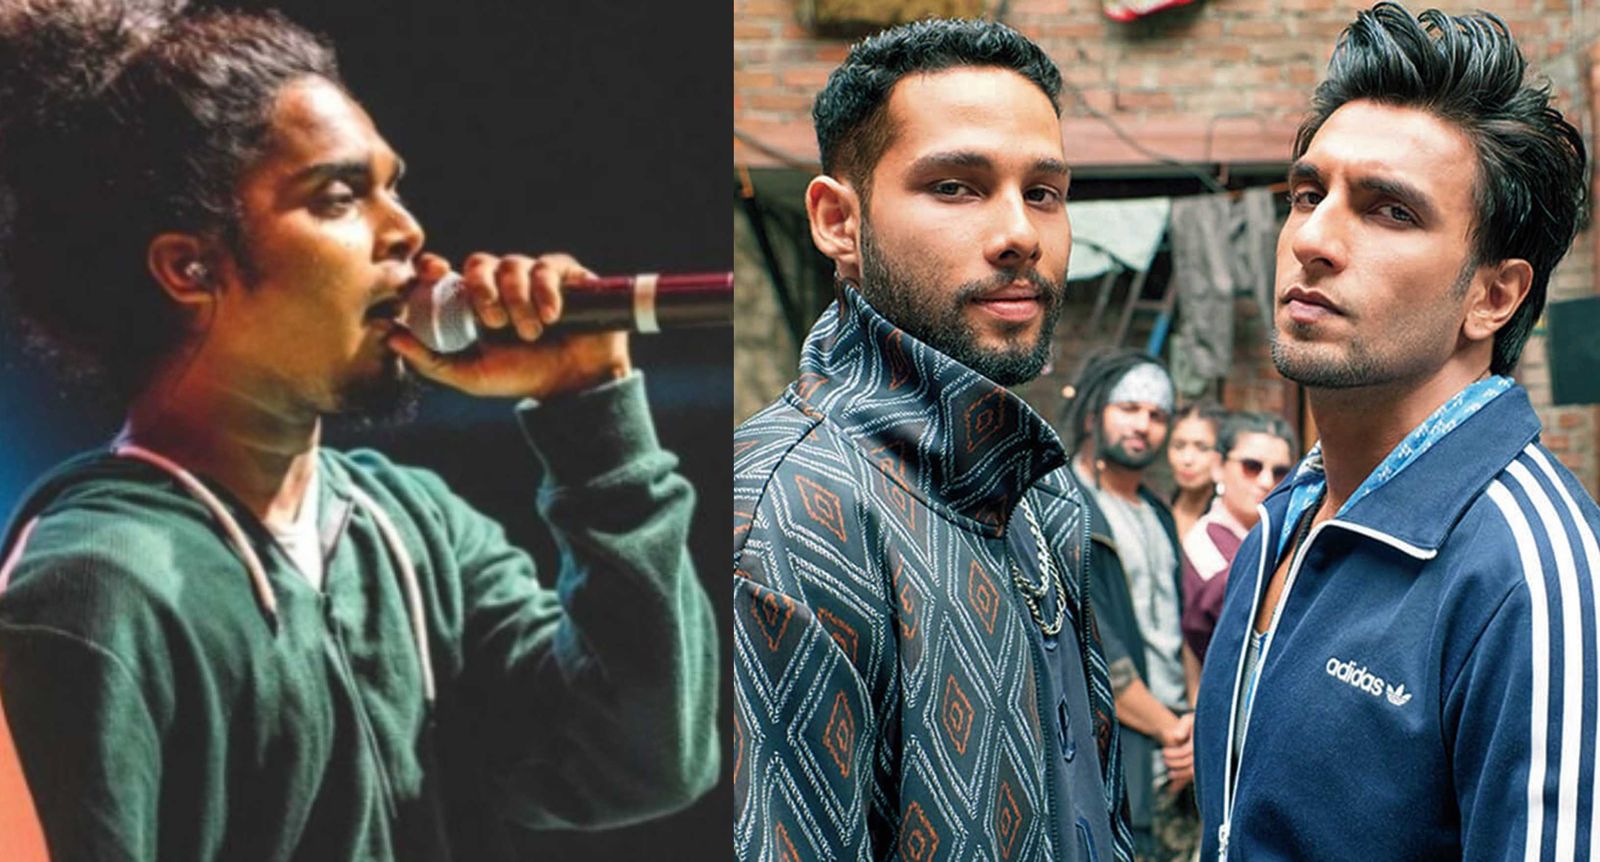 Gully Boy actors Ranveer Singh and Siddhant Chaturvedi mourn the demise of rapper MC Tod Fod